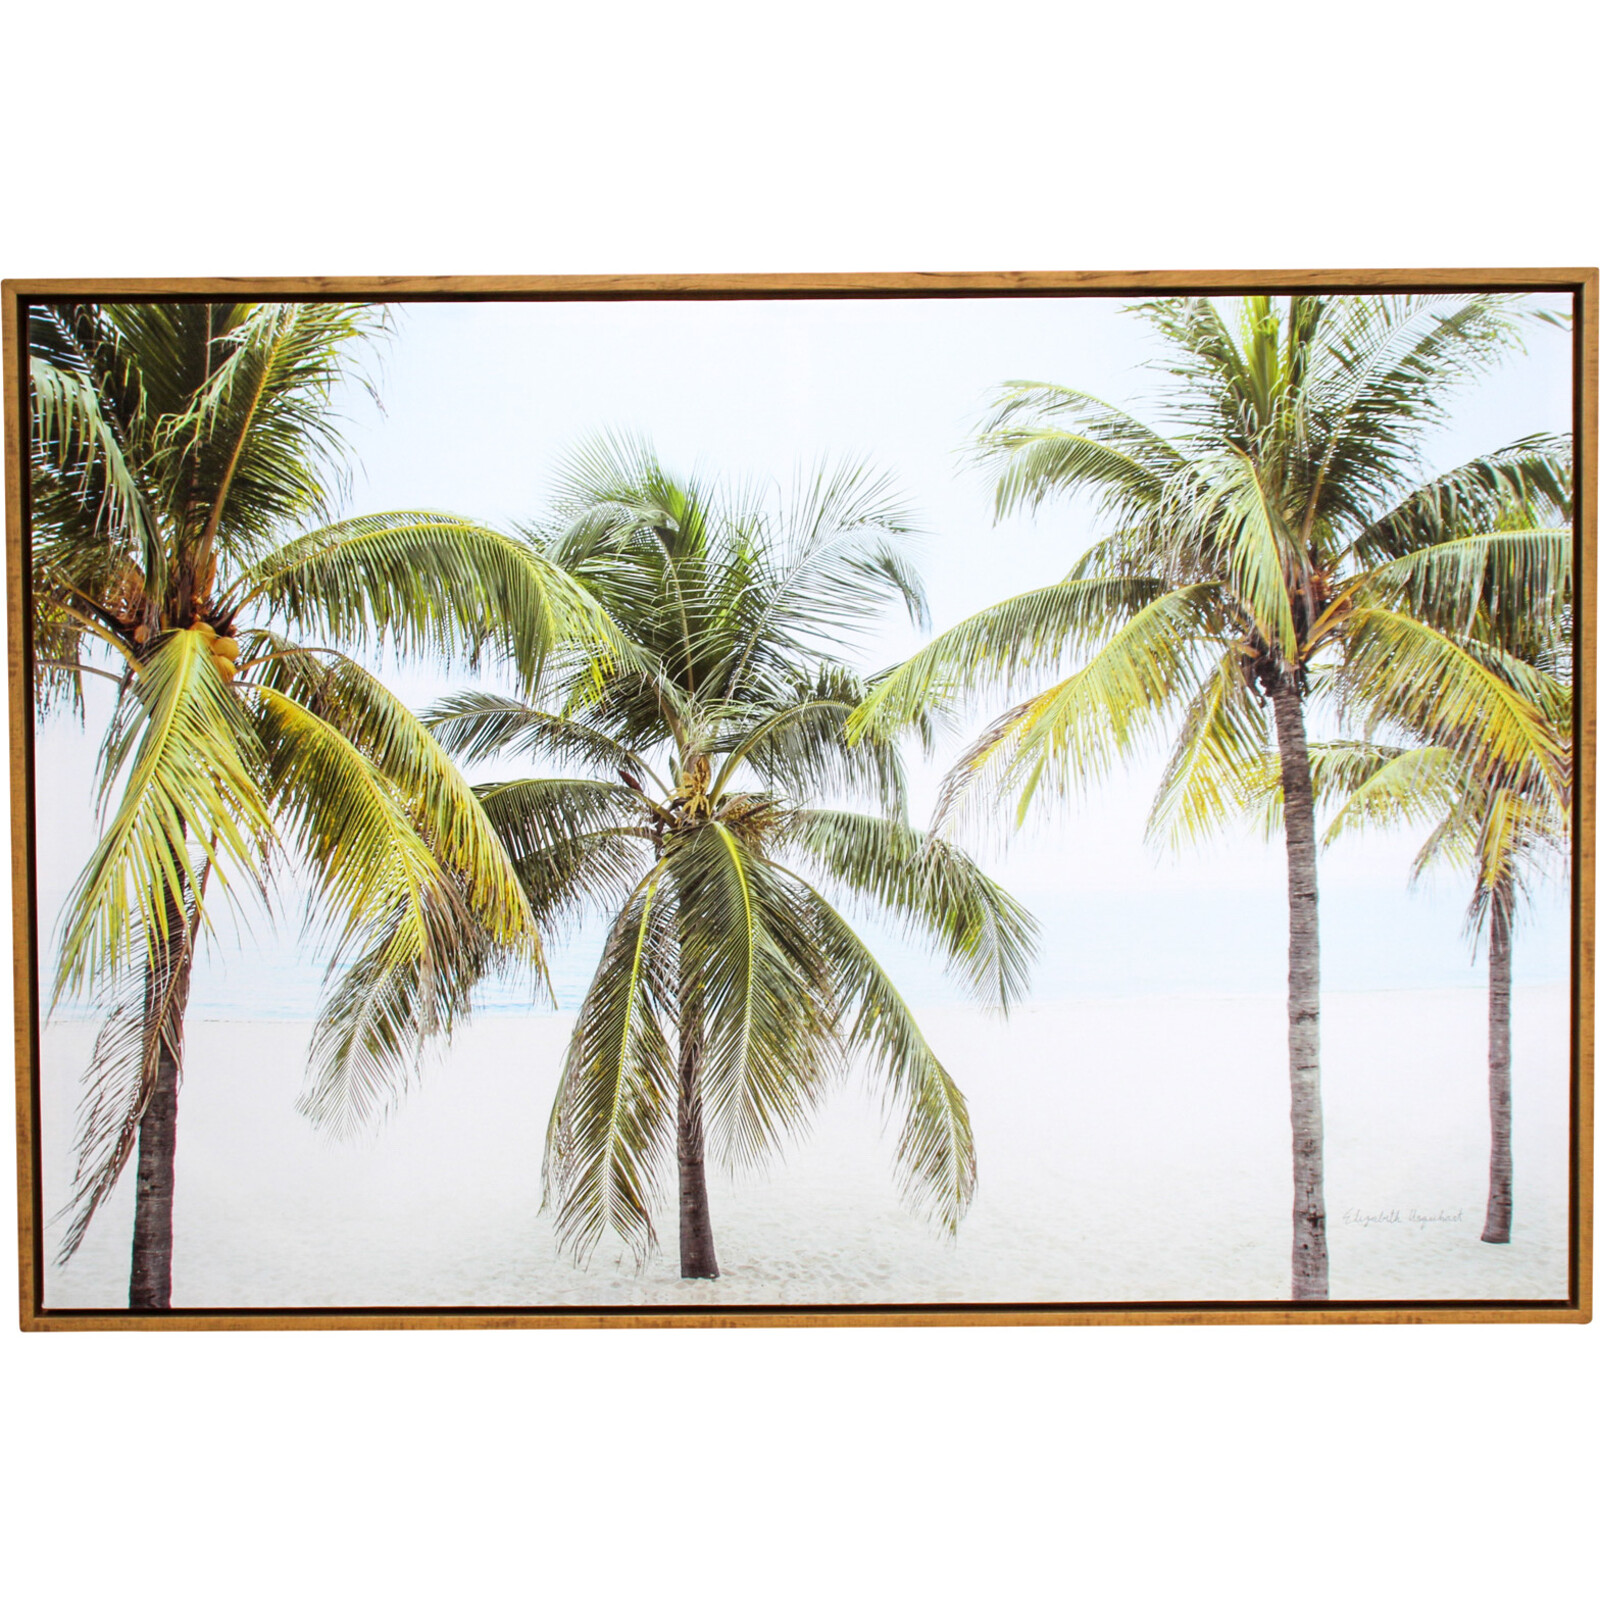 Framed Canvas By The Sea